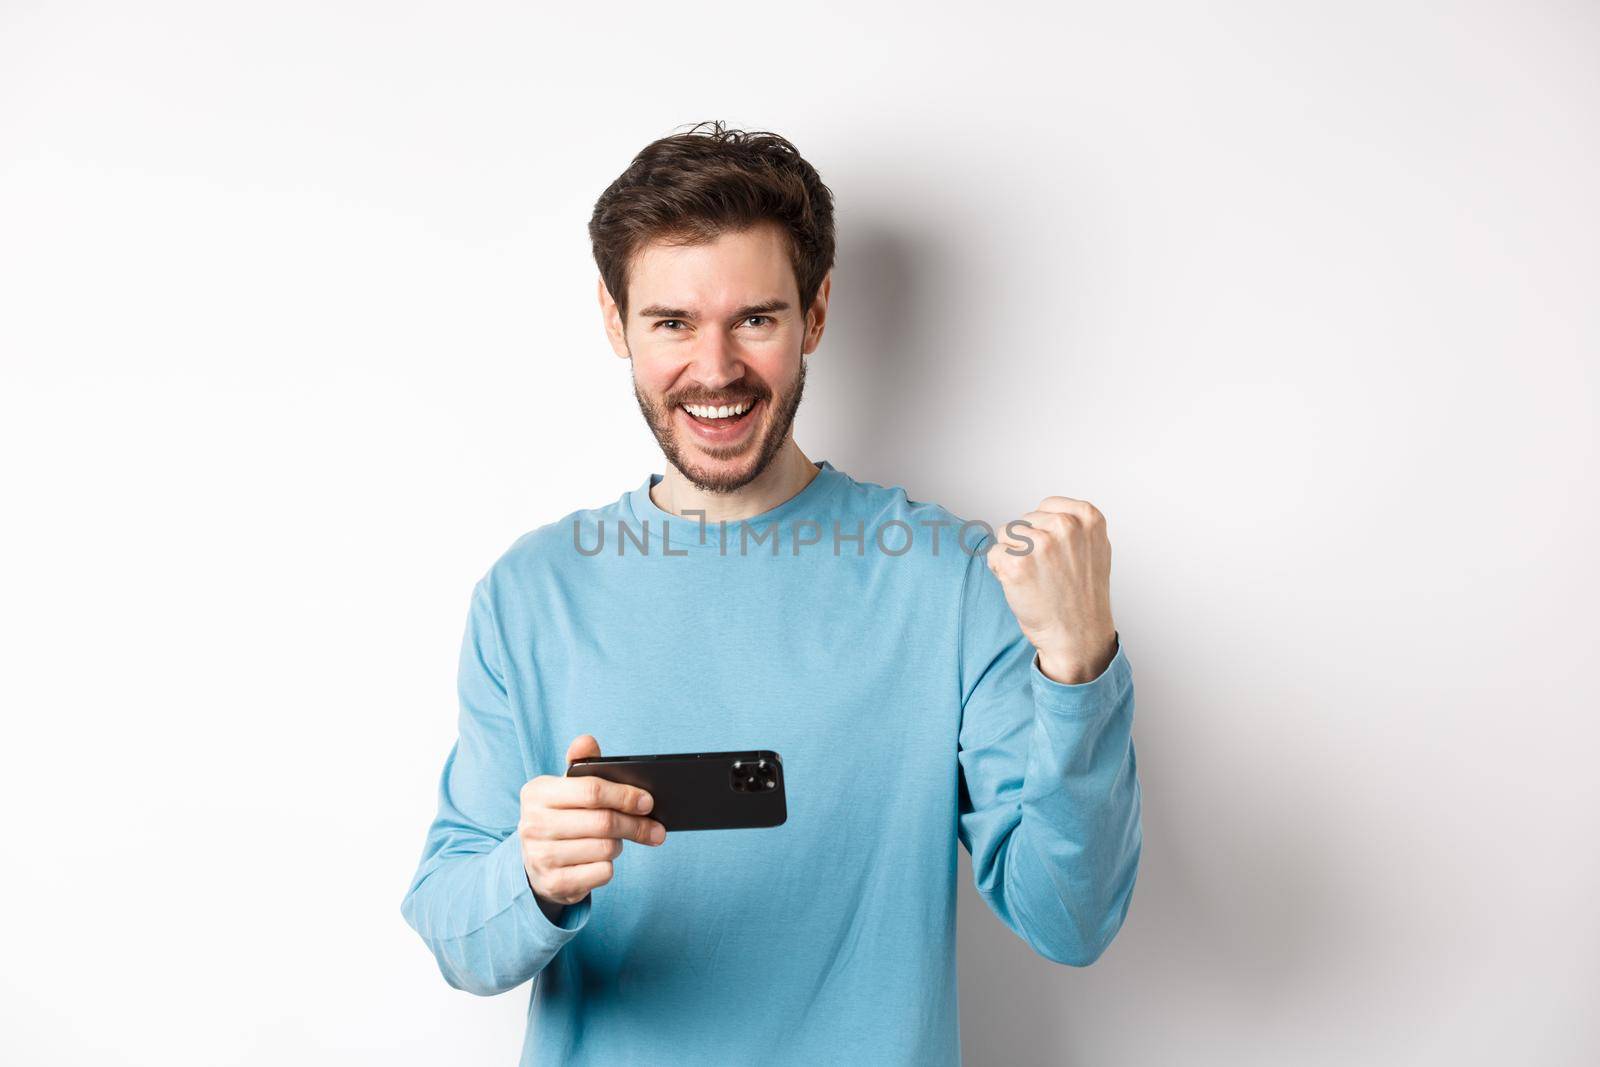 Lucky man winning in mobile video game, holding smartphone and saying yes, triumphing with fist pump, standing over white background.